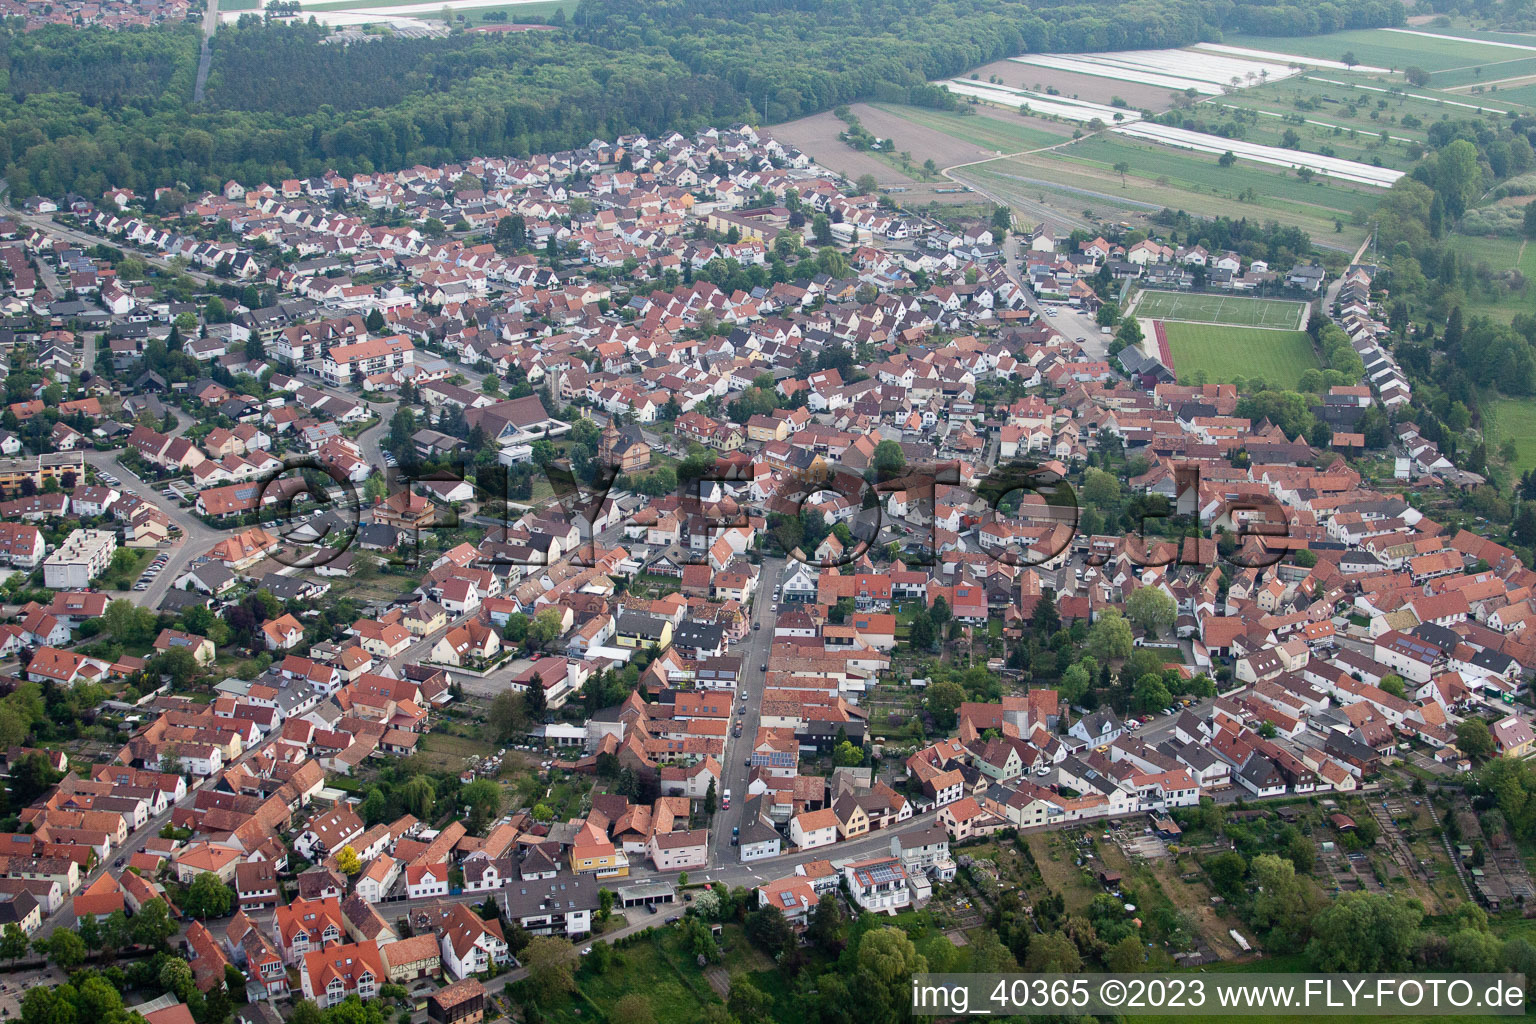 Jockgrim in the state Rhineland-Palatinate, Germany seen from above